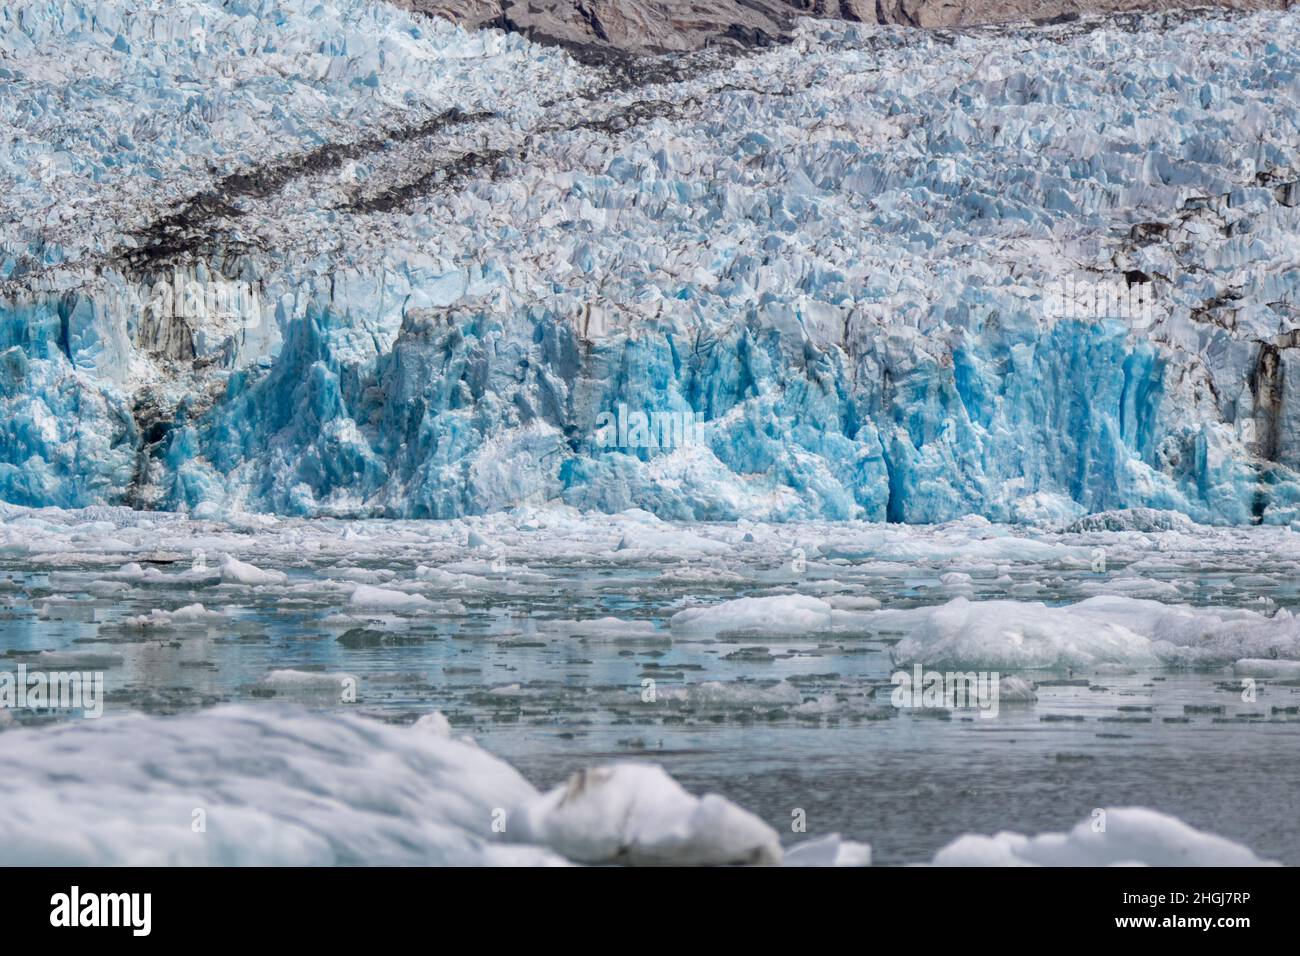 Floating icebergs, bergy bits and ice flows are seen in front of Dawes Glacier in Tracy Arm Wilderness, Alaska Stock Photo